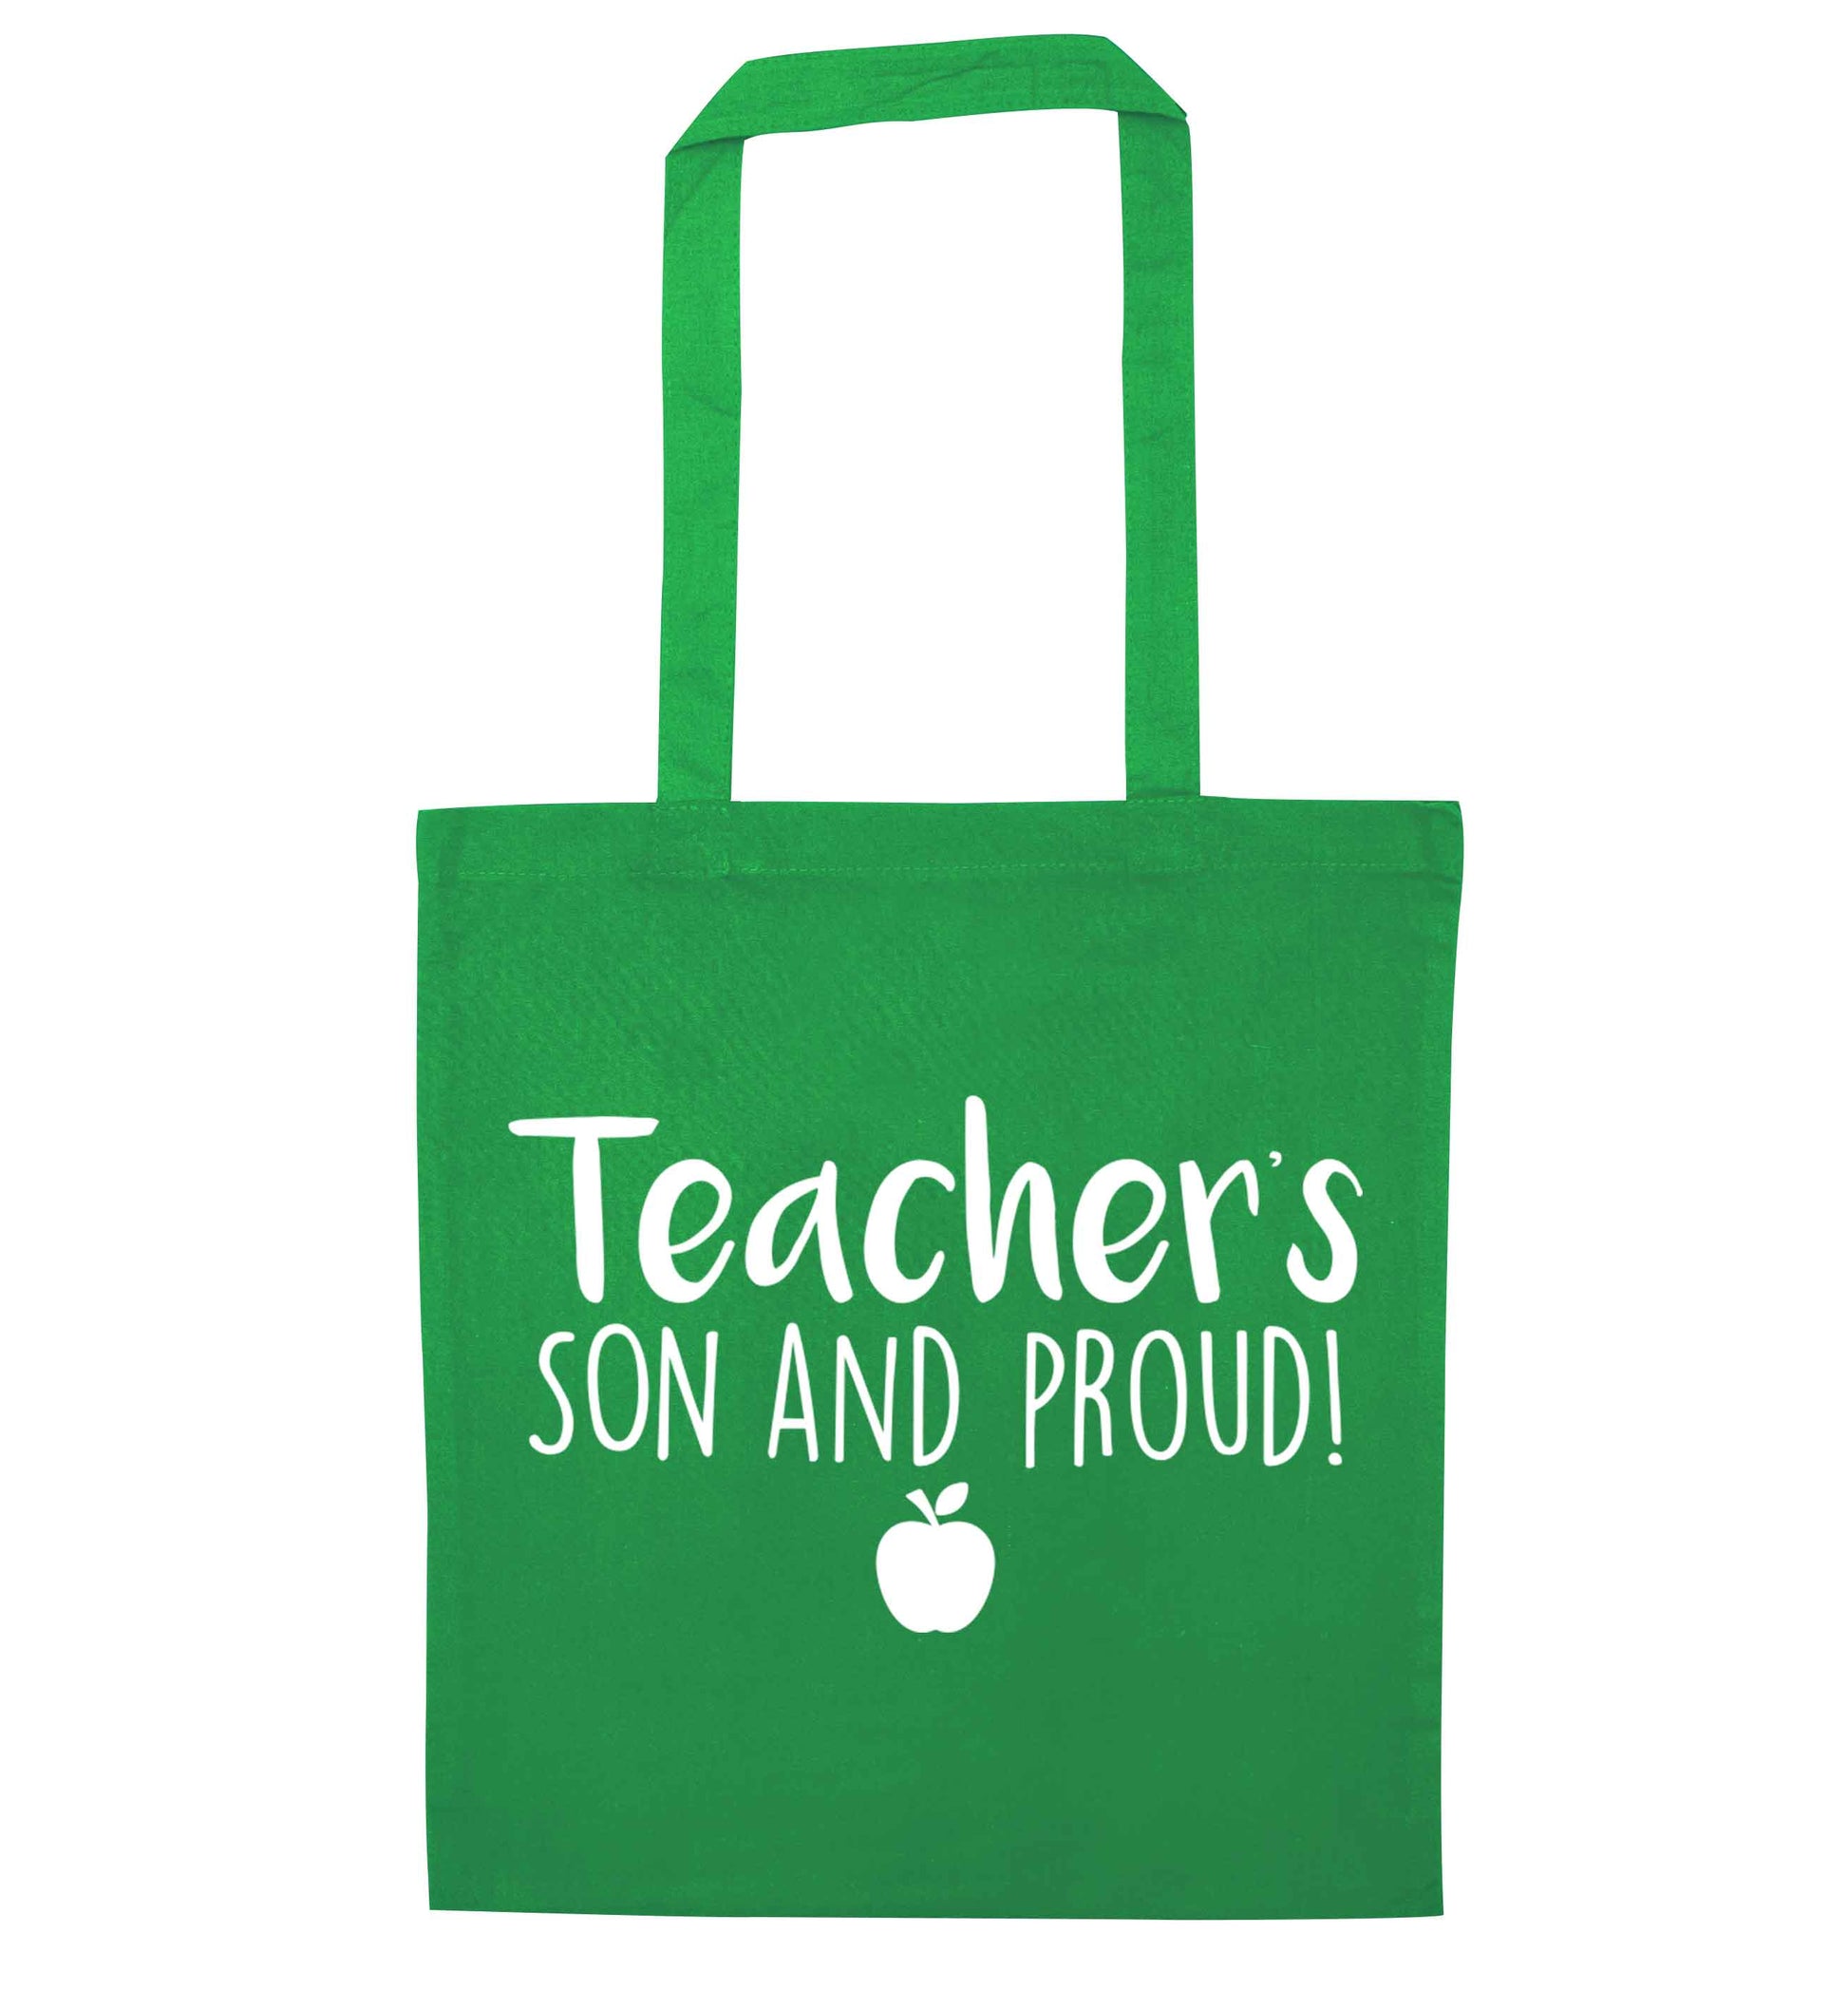 Teachers son and proud green tote bag